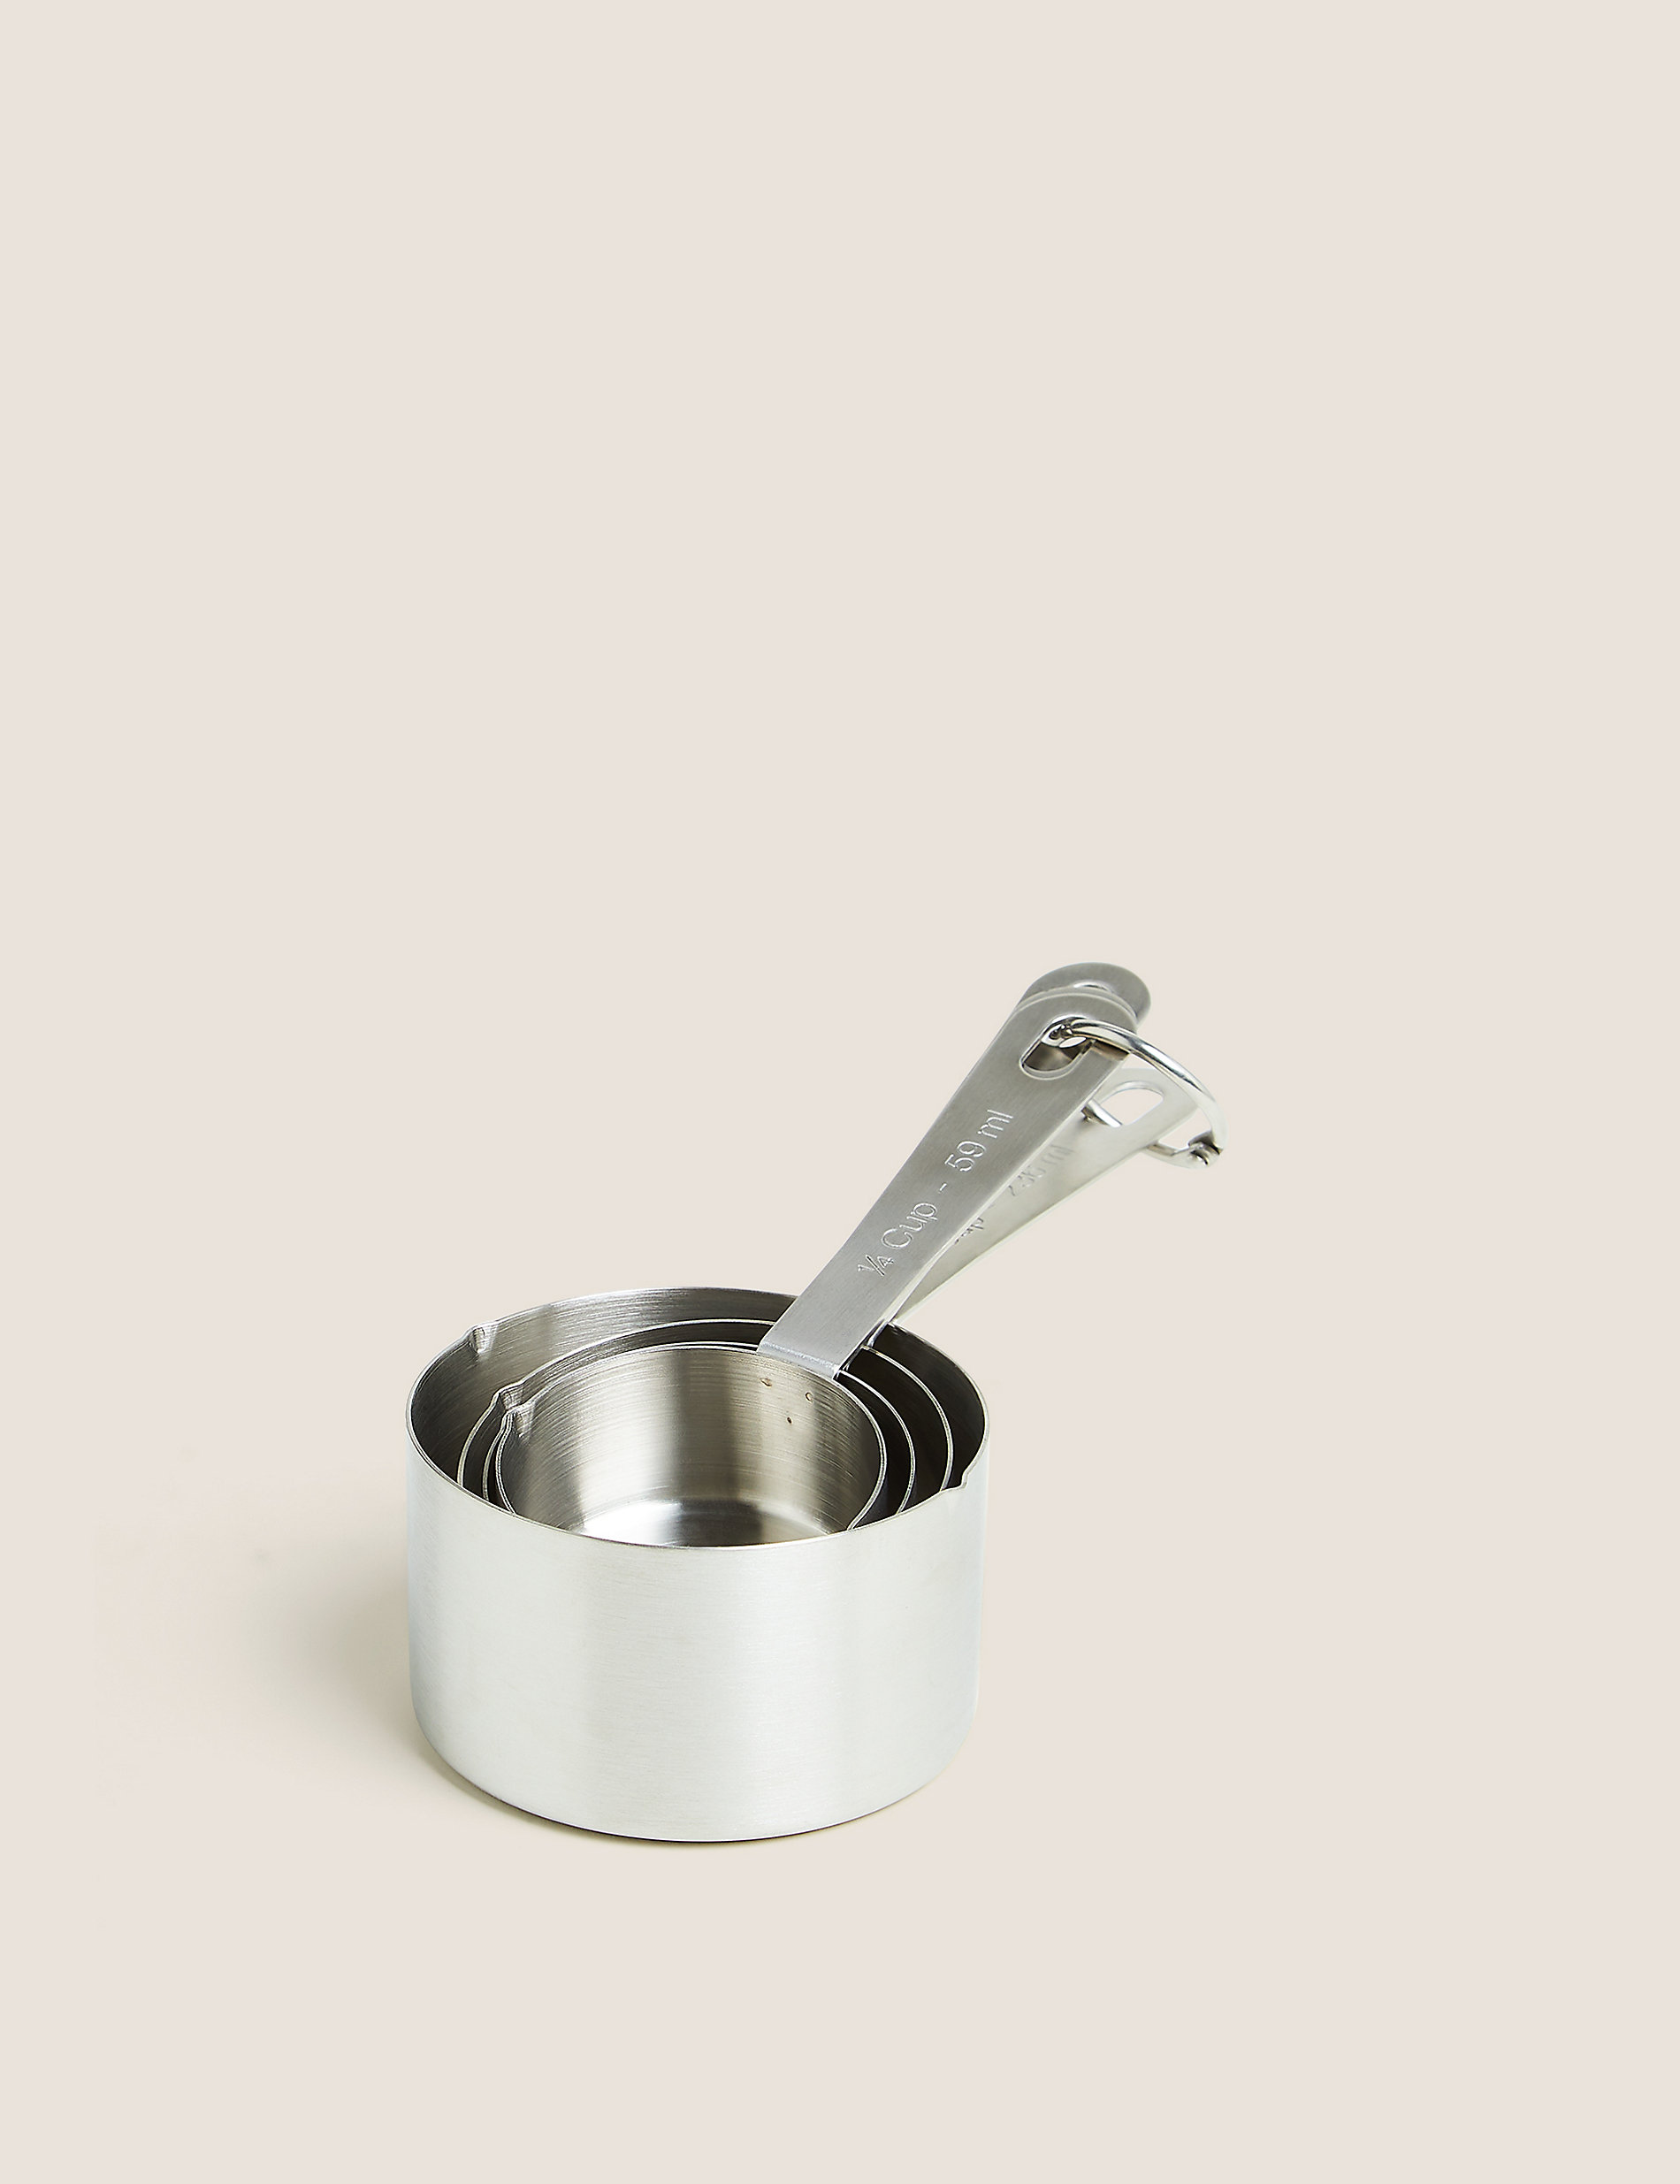 Set of 4 Stainless Steel Measuring Cups